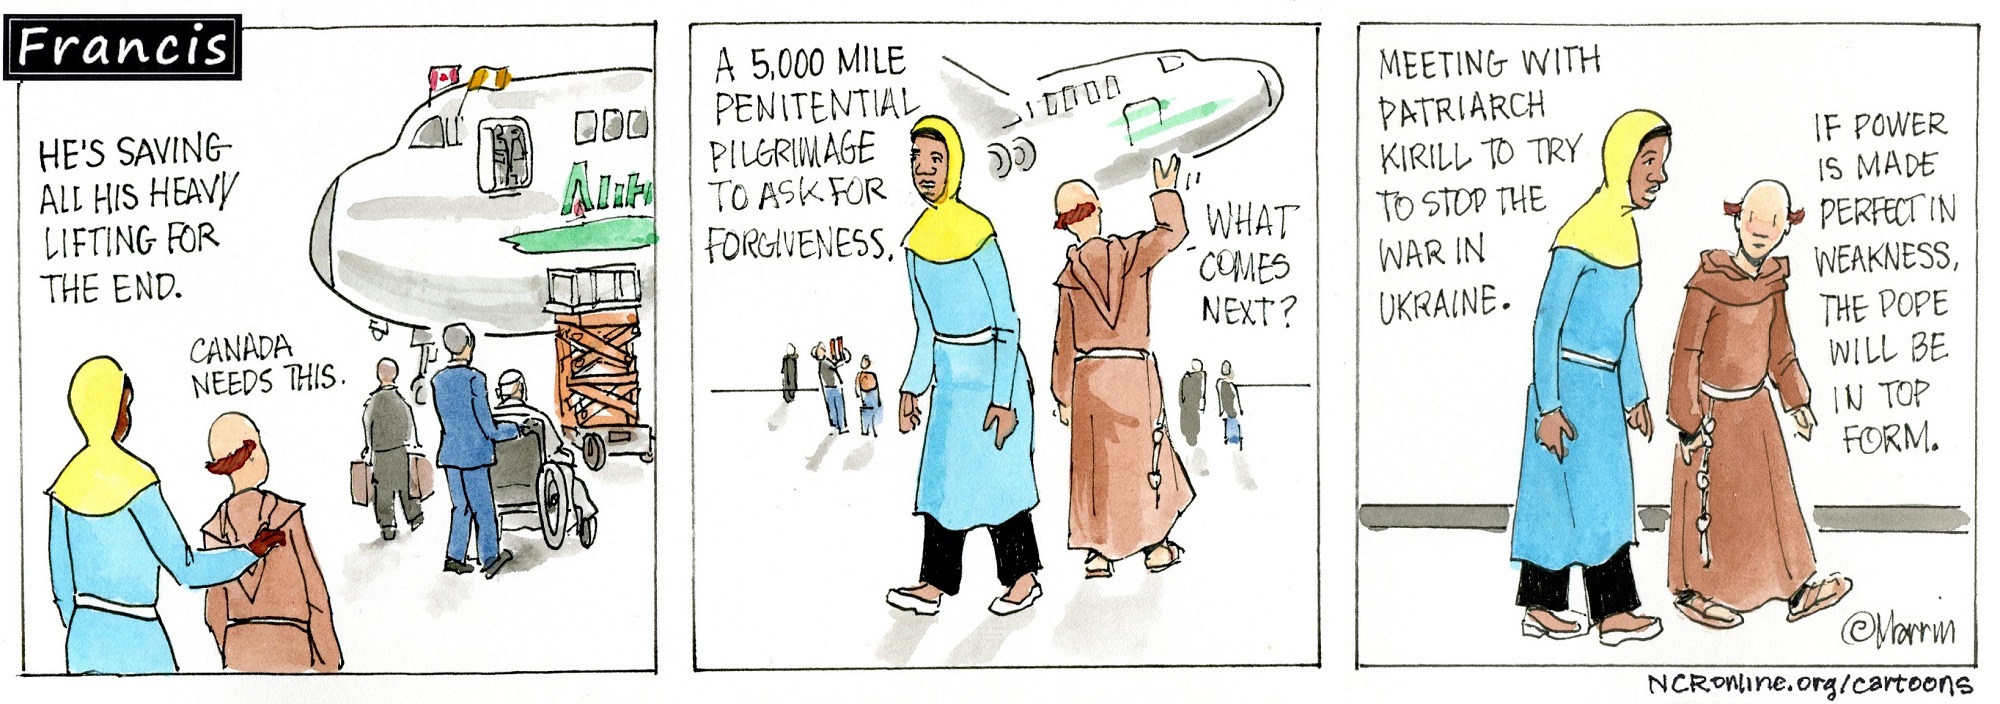 Francis, the comic strip: Francis is saving all his heavy lifting for the end.